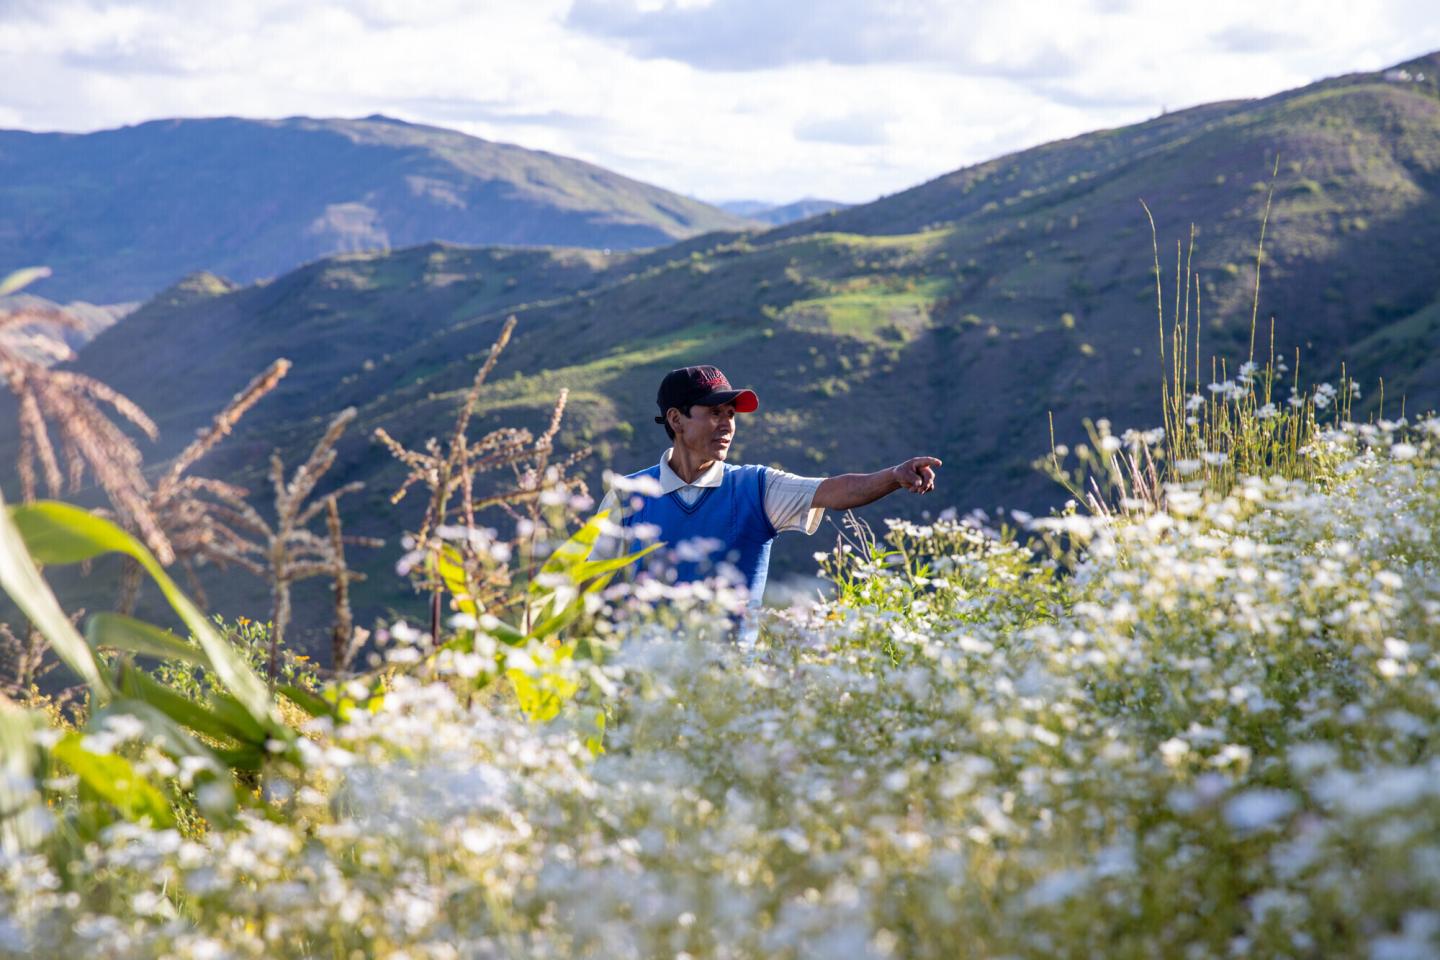 A Bolivian man in a blue sweater vest and a black baseball cap stands in a field. He is pointing to something out of sight on the right